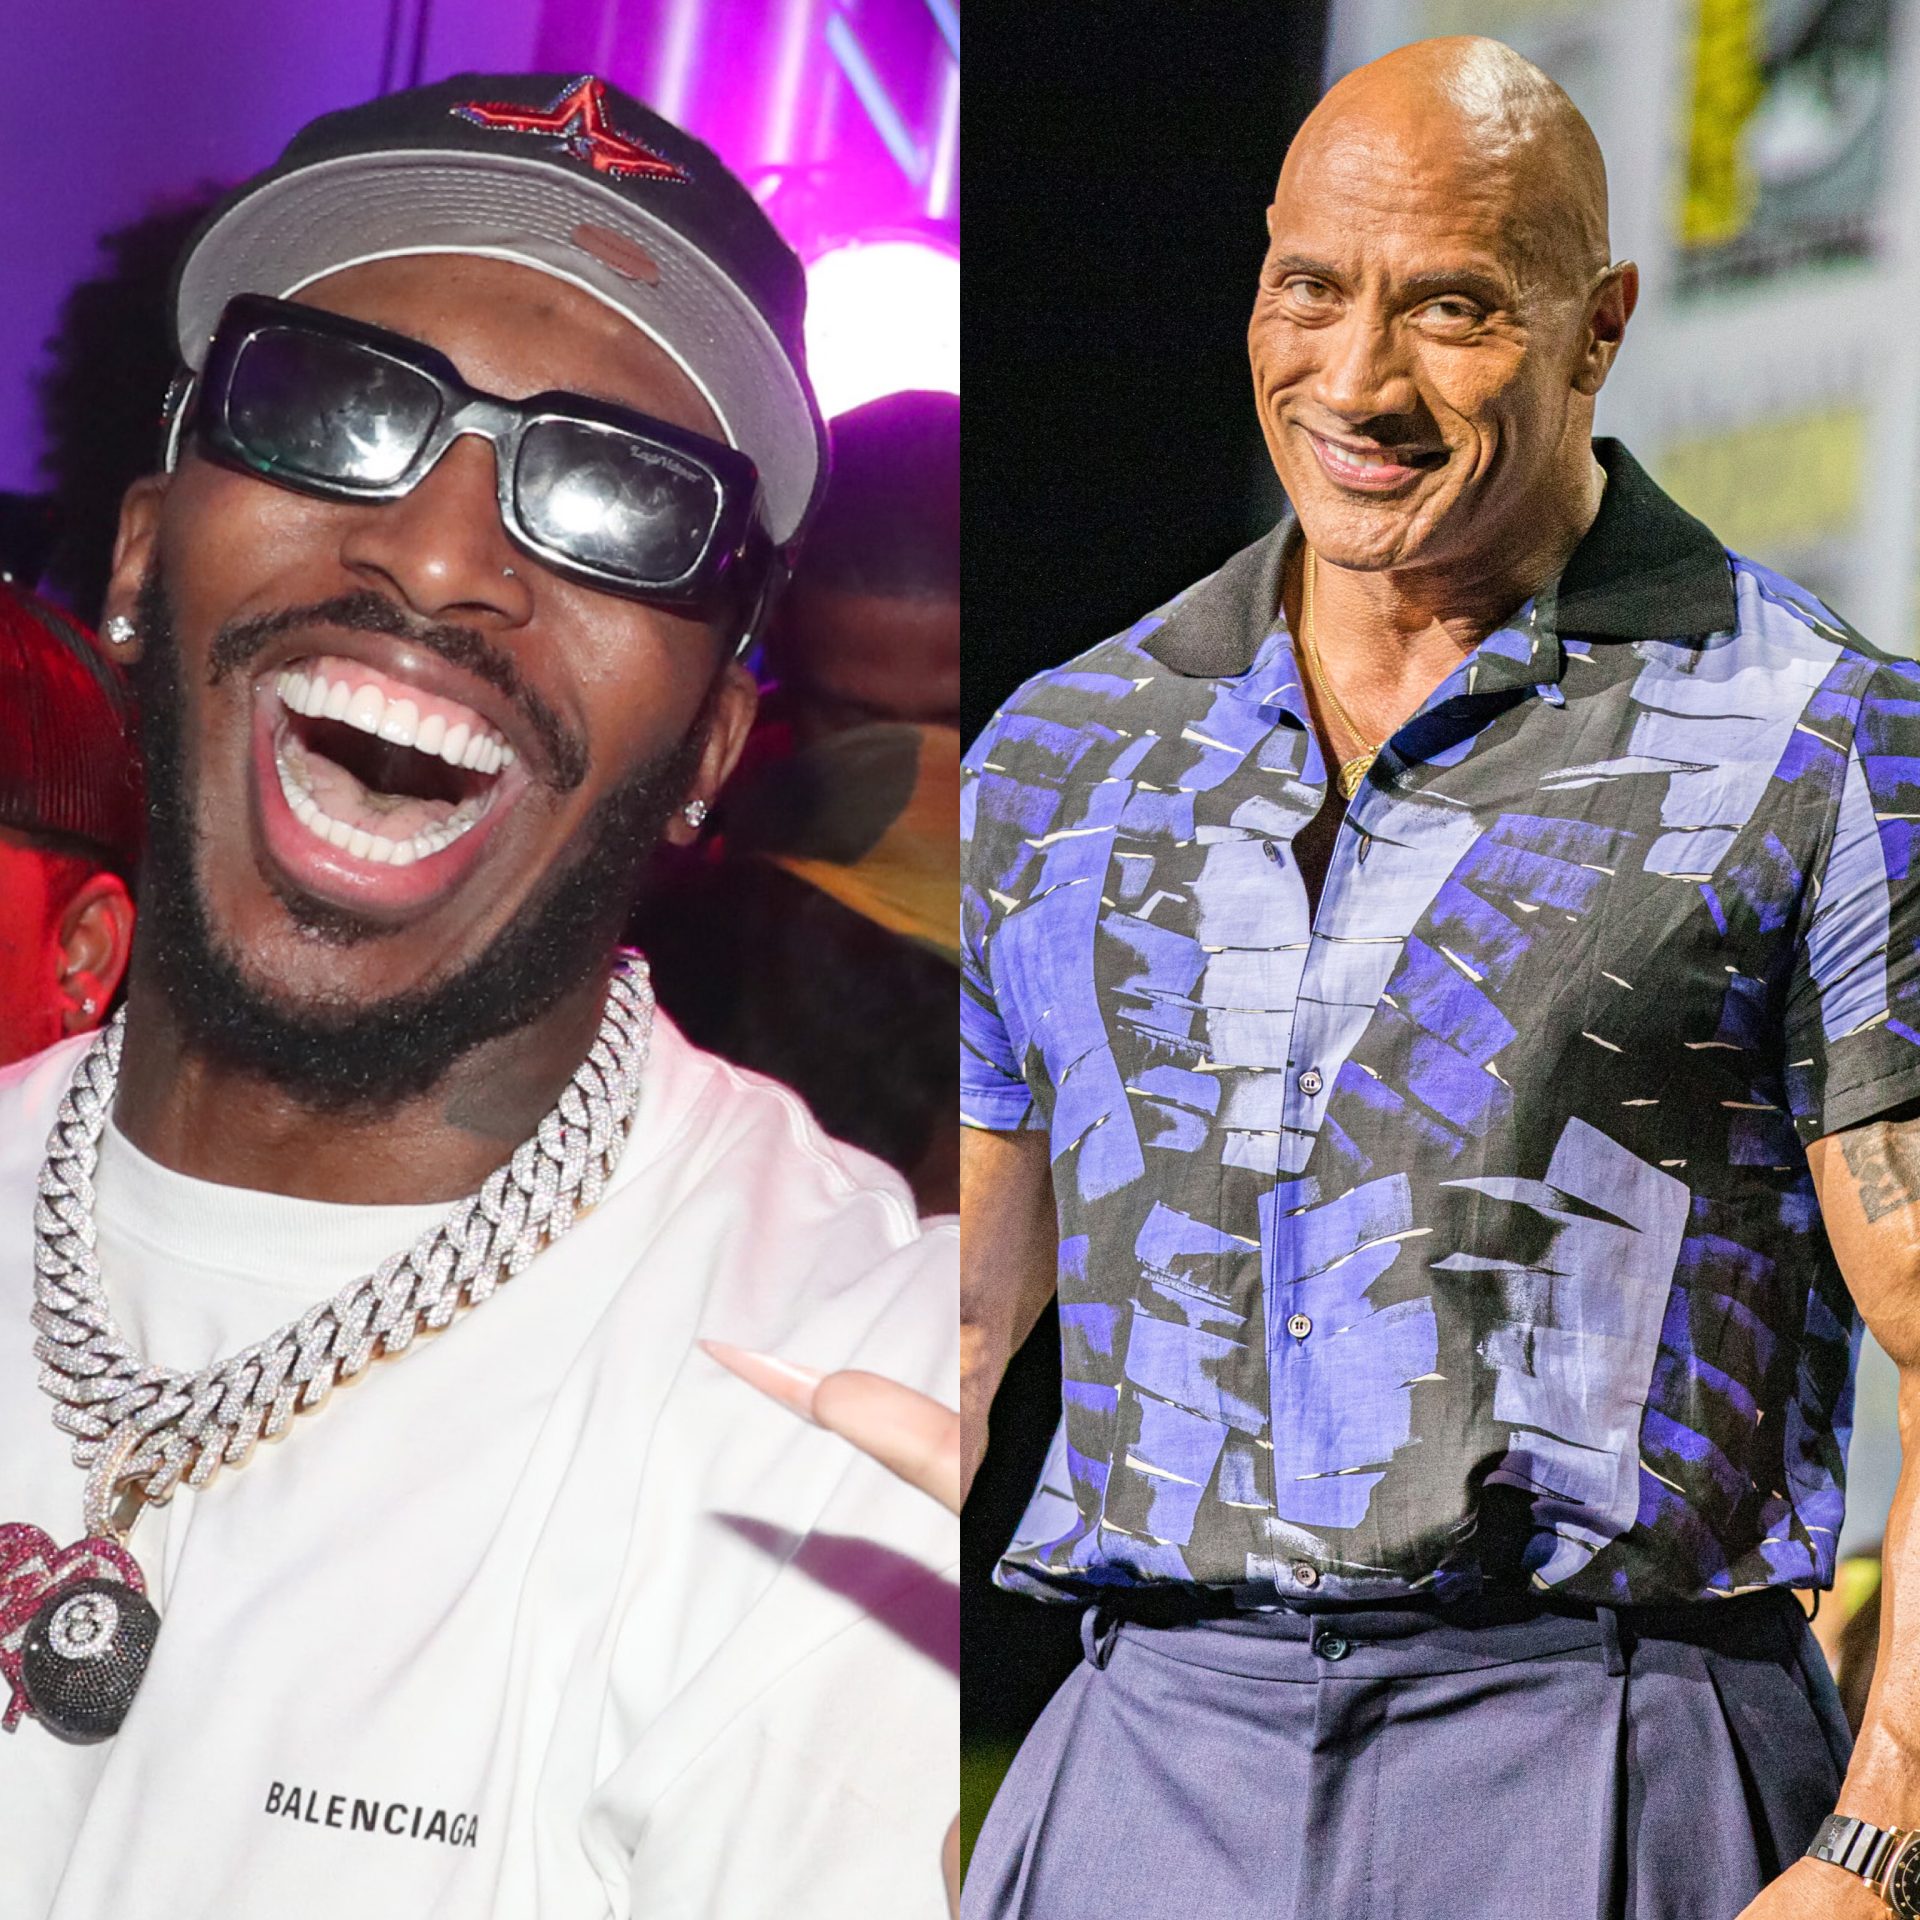 Pardison Fontaine Is not Mad At The Rock For Current Feedback